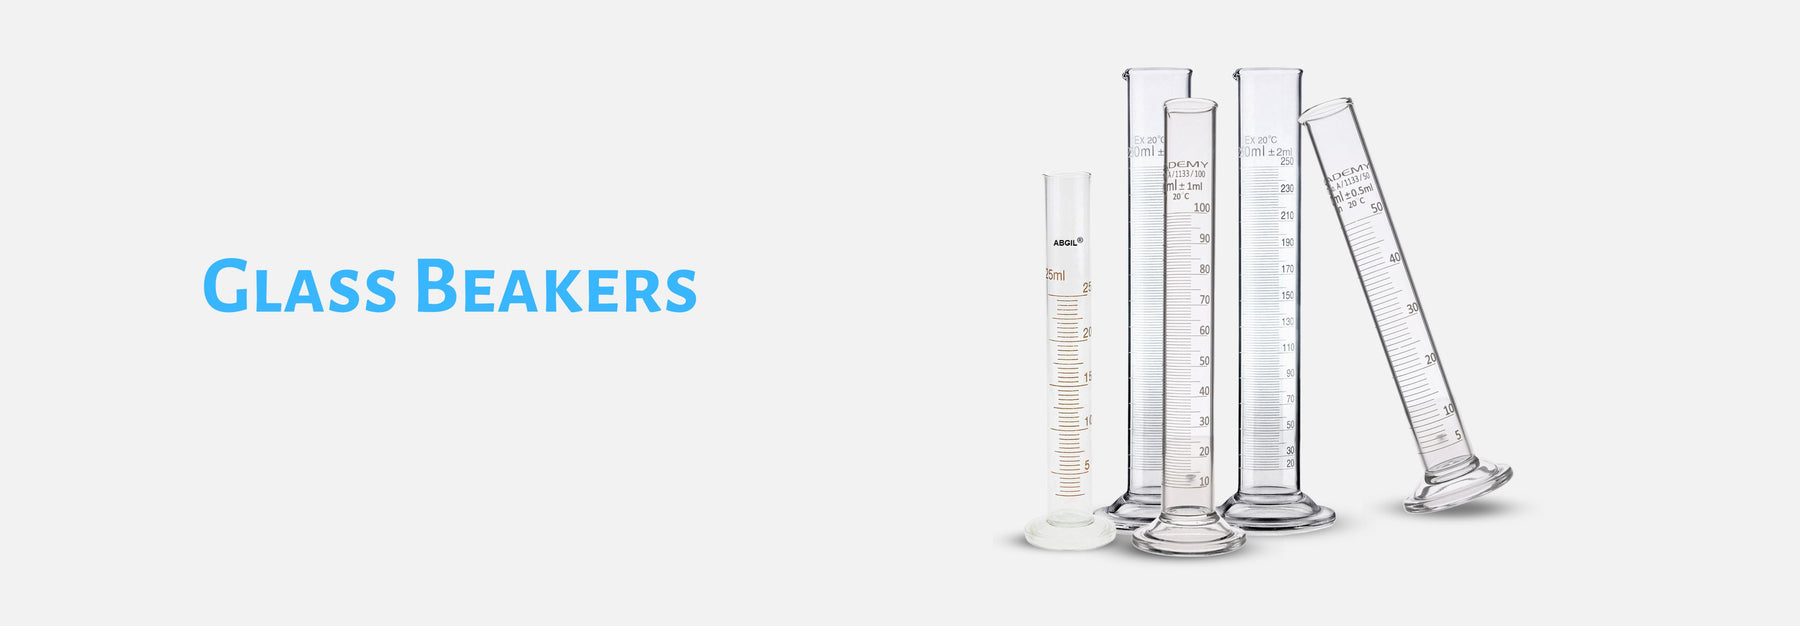 The Measuring Cylinder